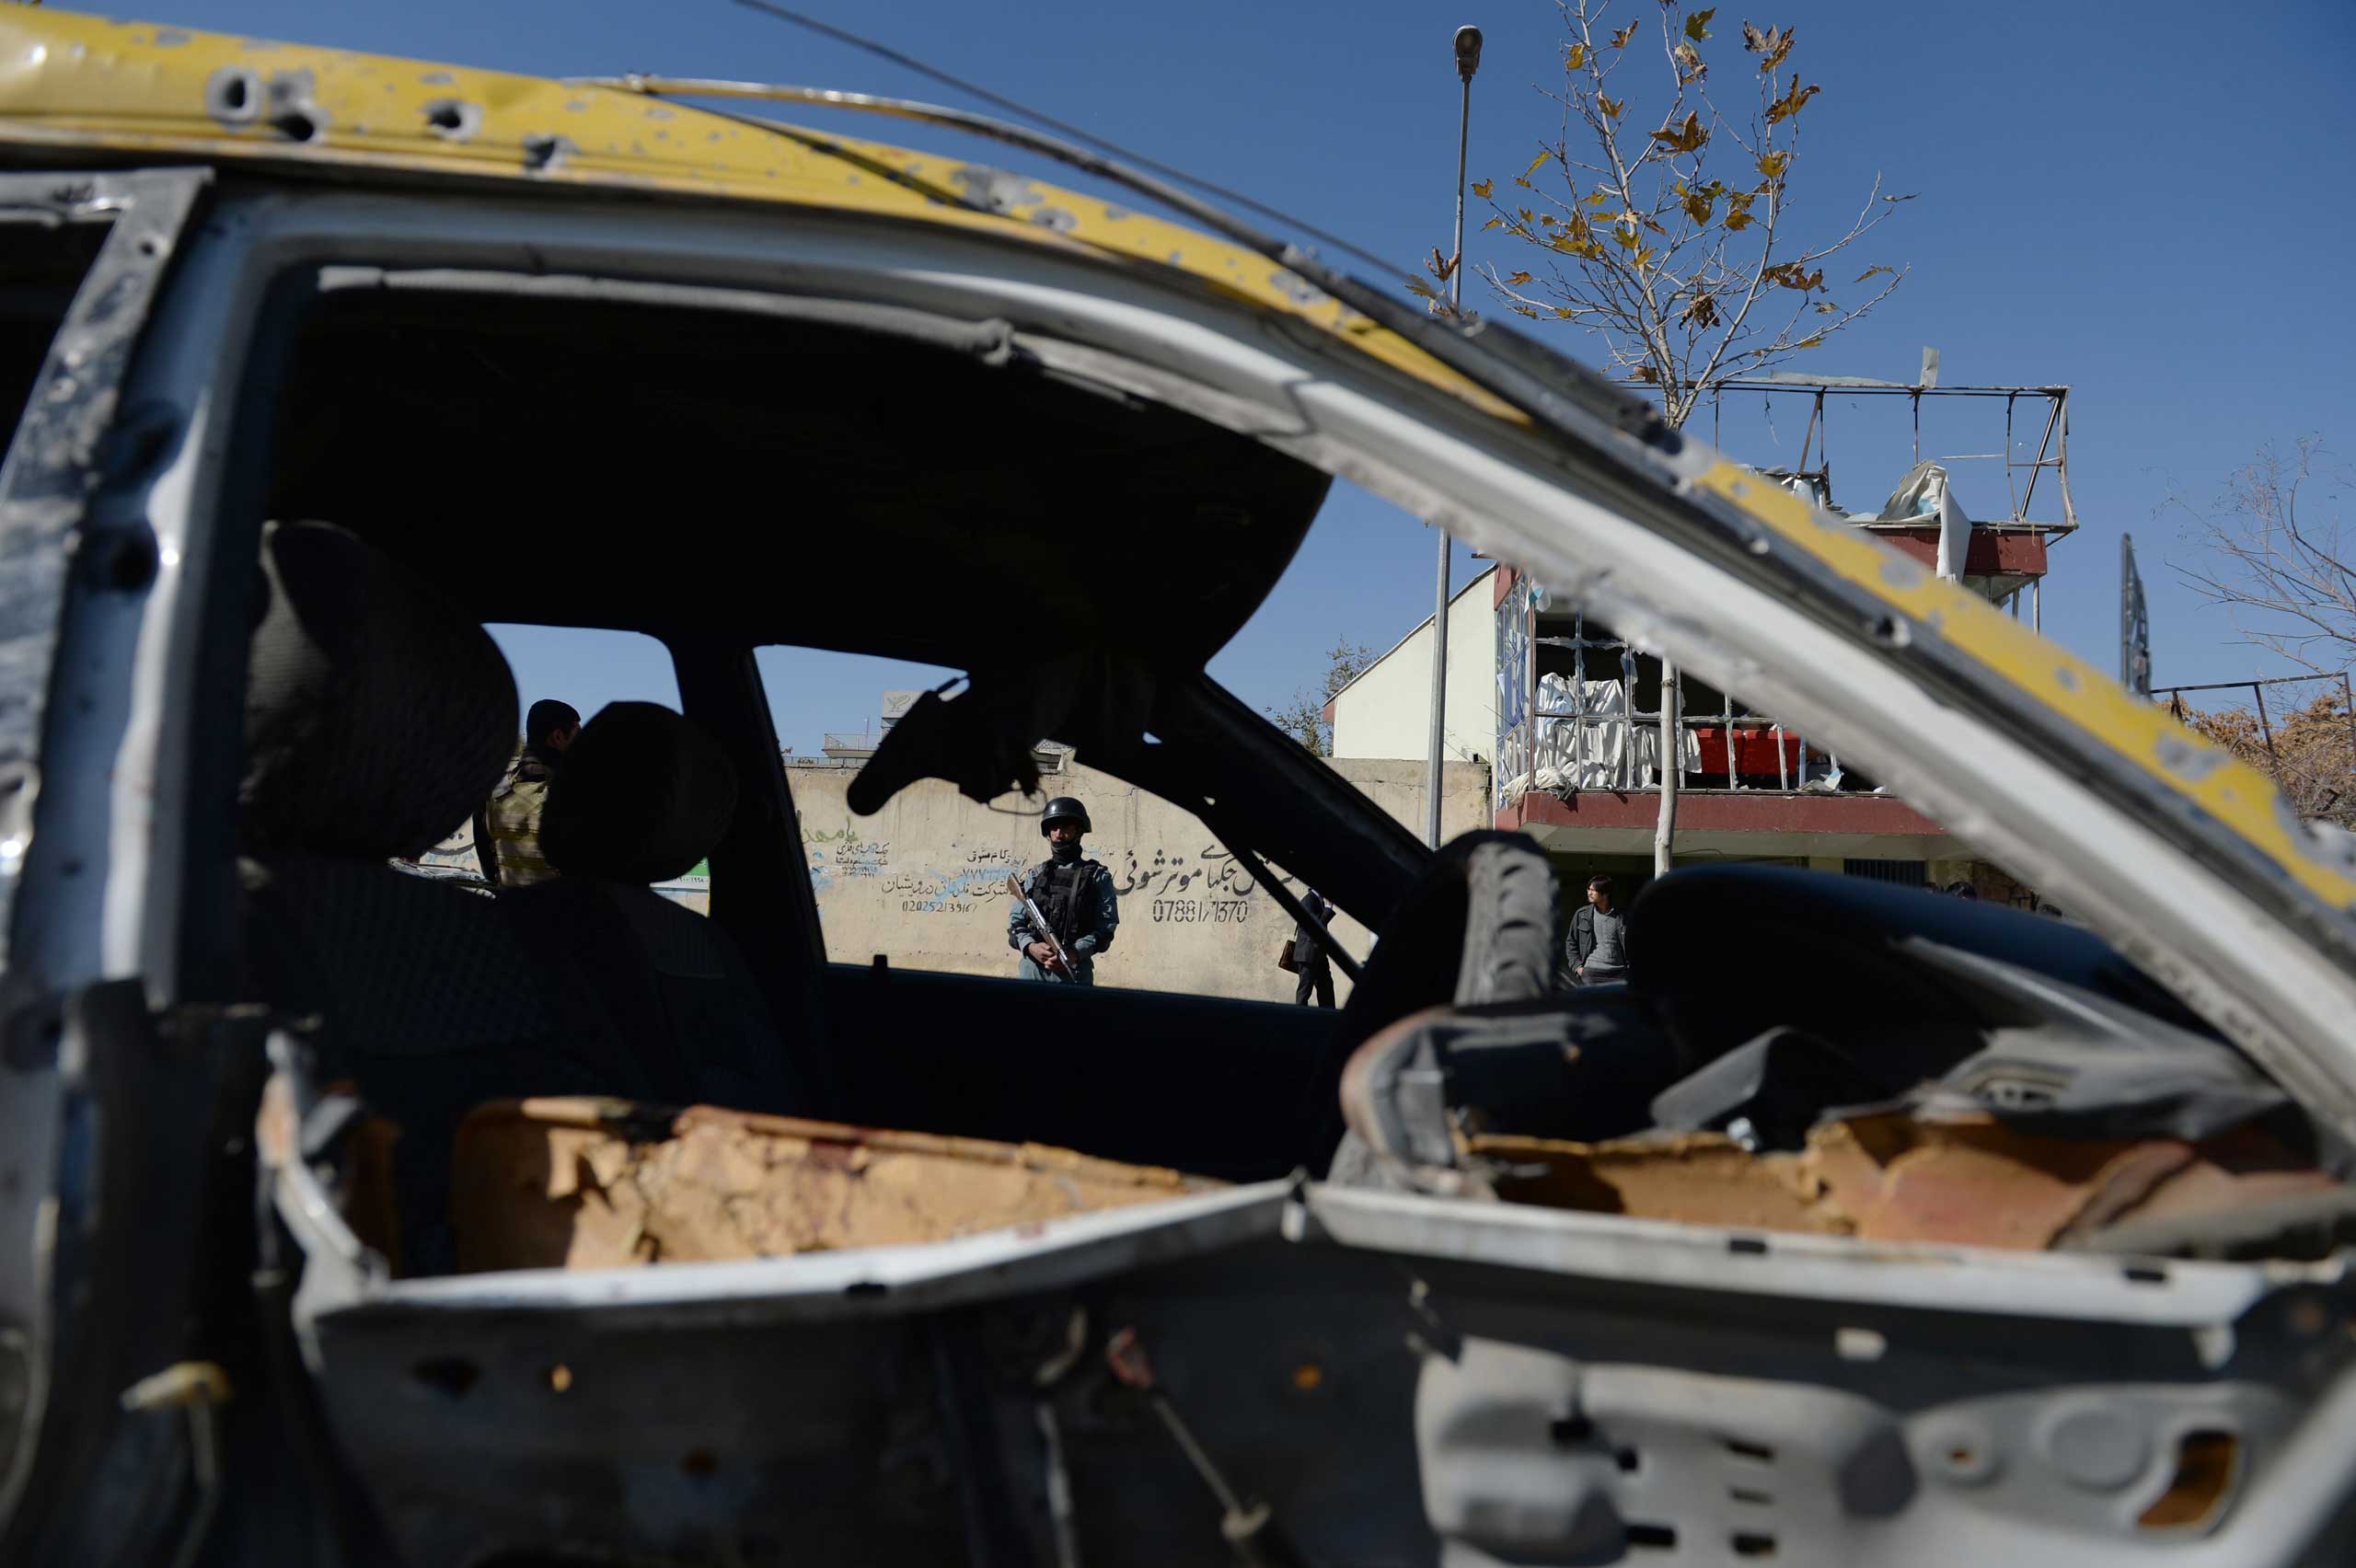 An Afghan policeman is seen through the wreckage of a taxi which was destroyed by a suicide attack targeting a vehicle convoy of Afghan lawmakers in Kabul, Afghanistan on Nov. 16, 2014. (Farshad Usyan—AFP/Getty Images)